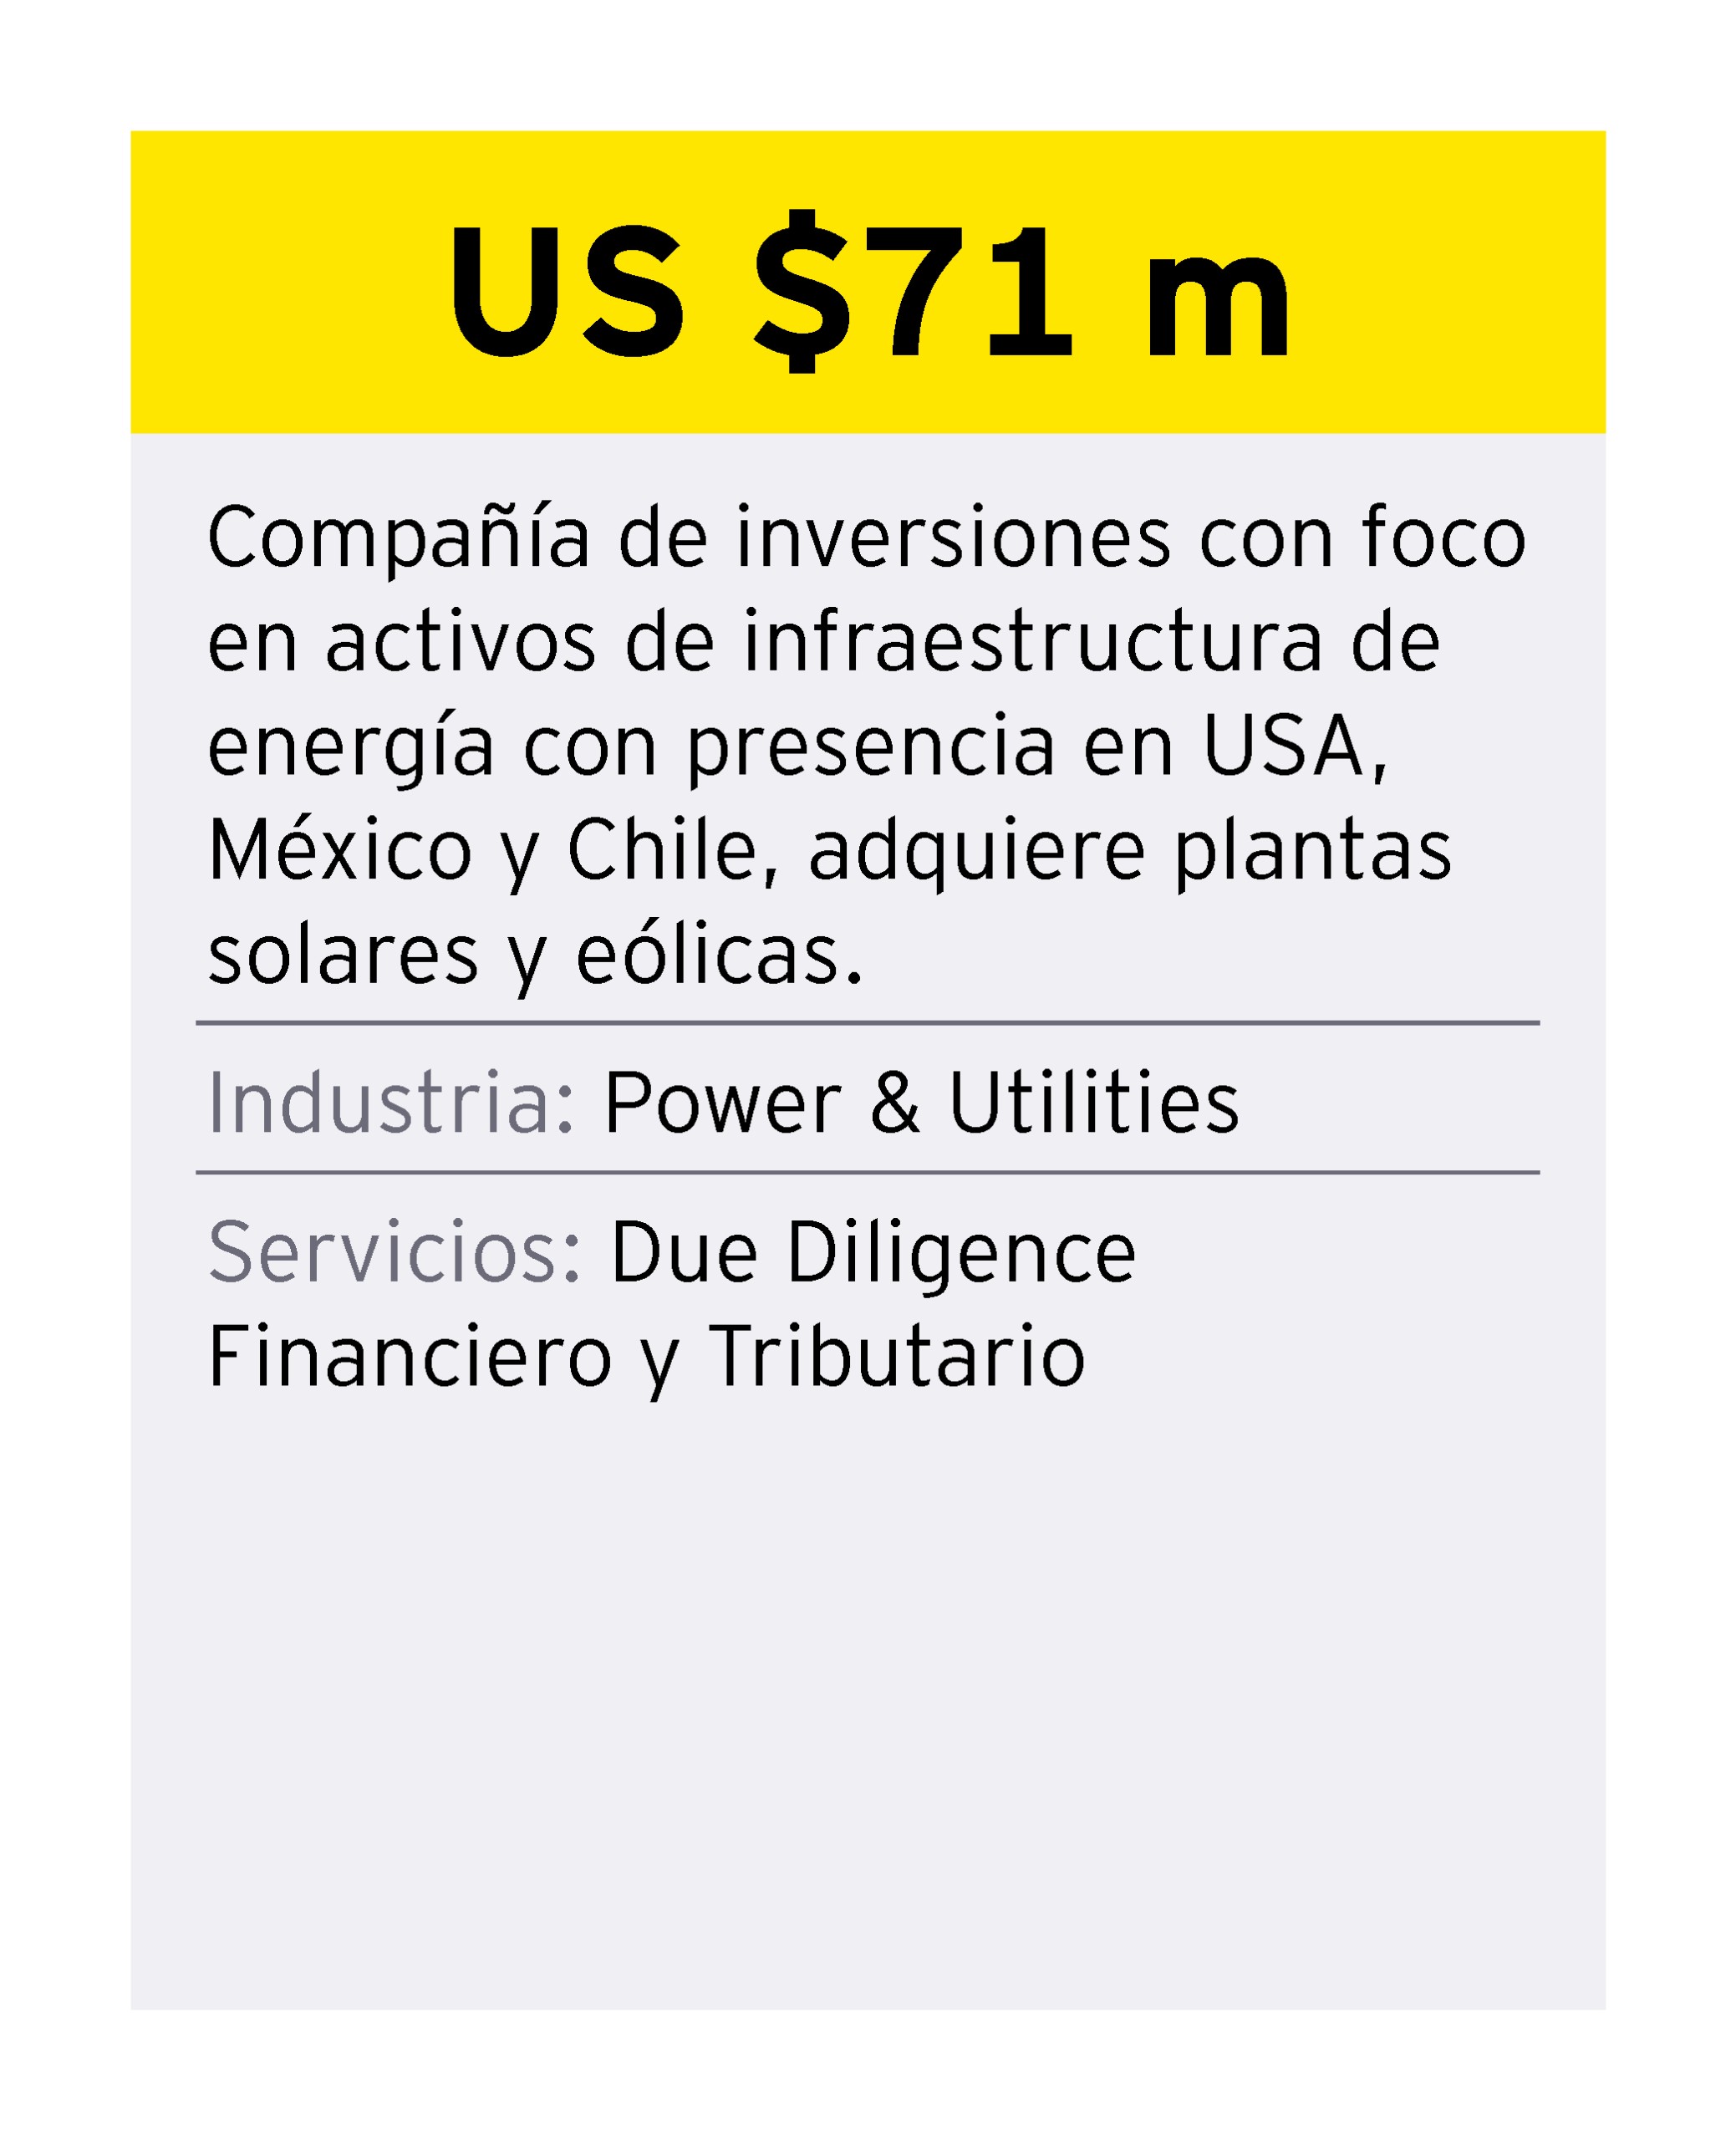 ey-chile-credencial-3-energy